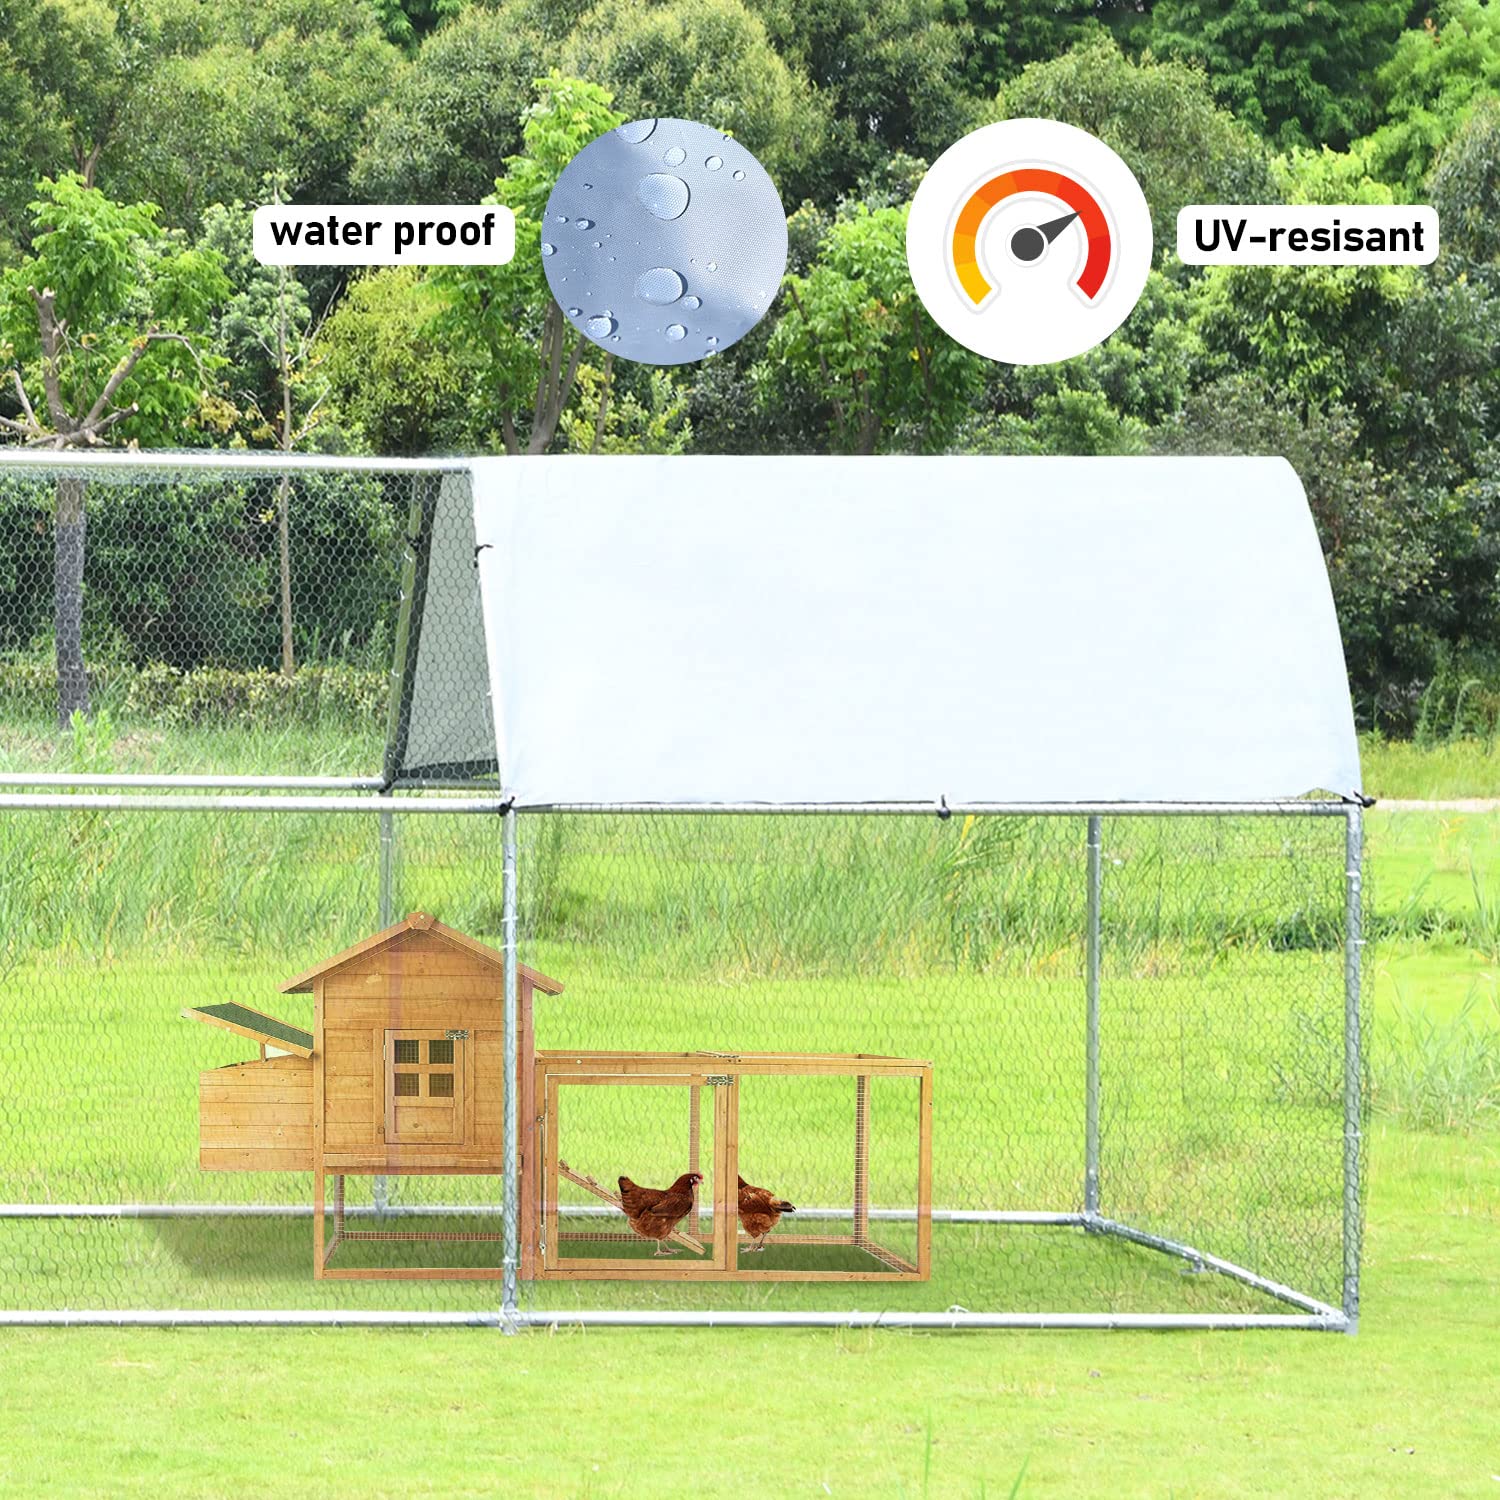 1.26’’ Large Metal Chicken Coop Run Walk in, Chicken Run Pen for Chickens, Outdoor Chicken Runs Coops Dog Kennel, Flat Roofed Chicken Runs for Yard with Anti-Ultraviolet Cover (9.2’L x6.2’W x6.4’H)